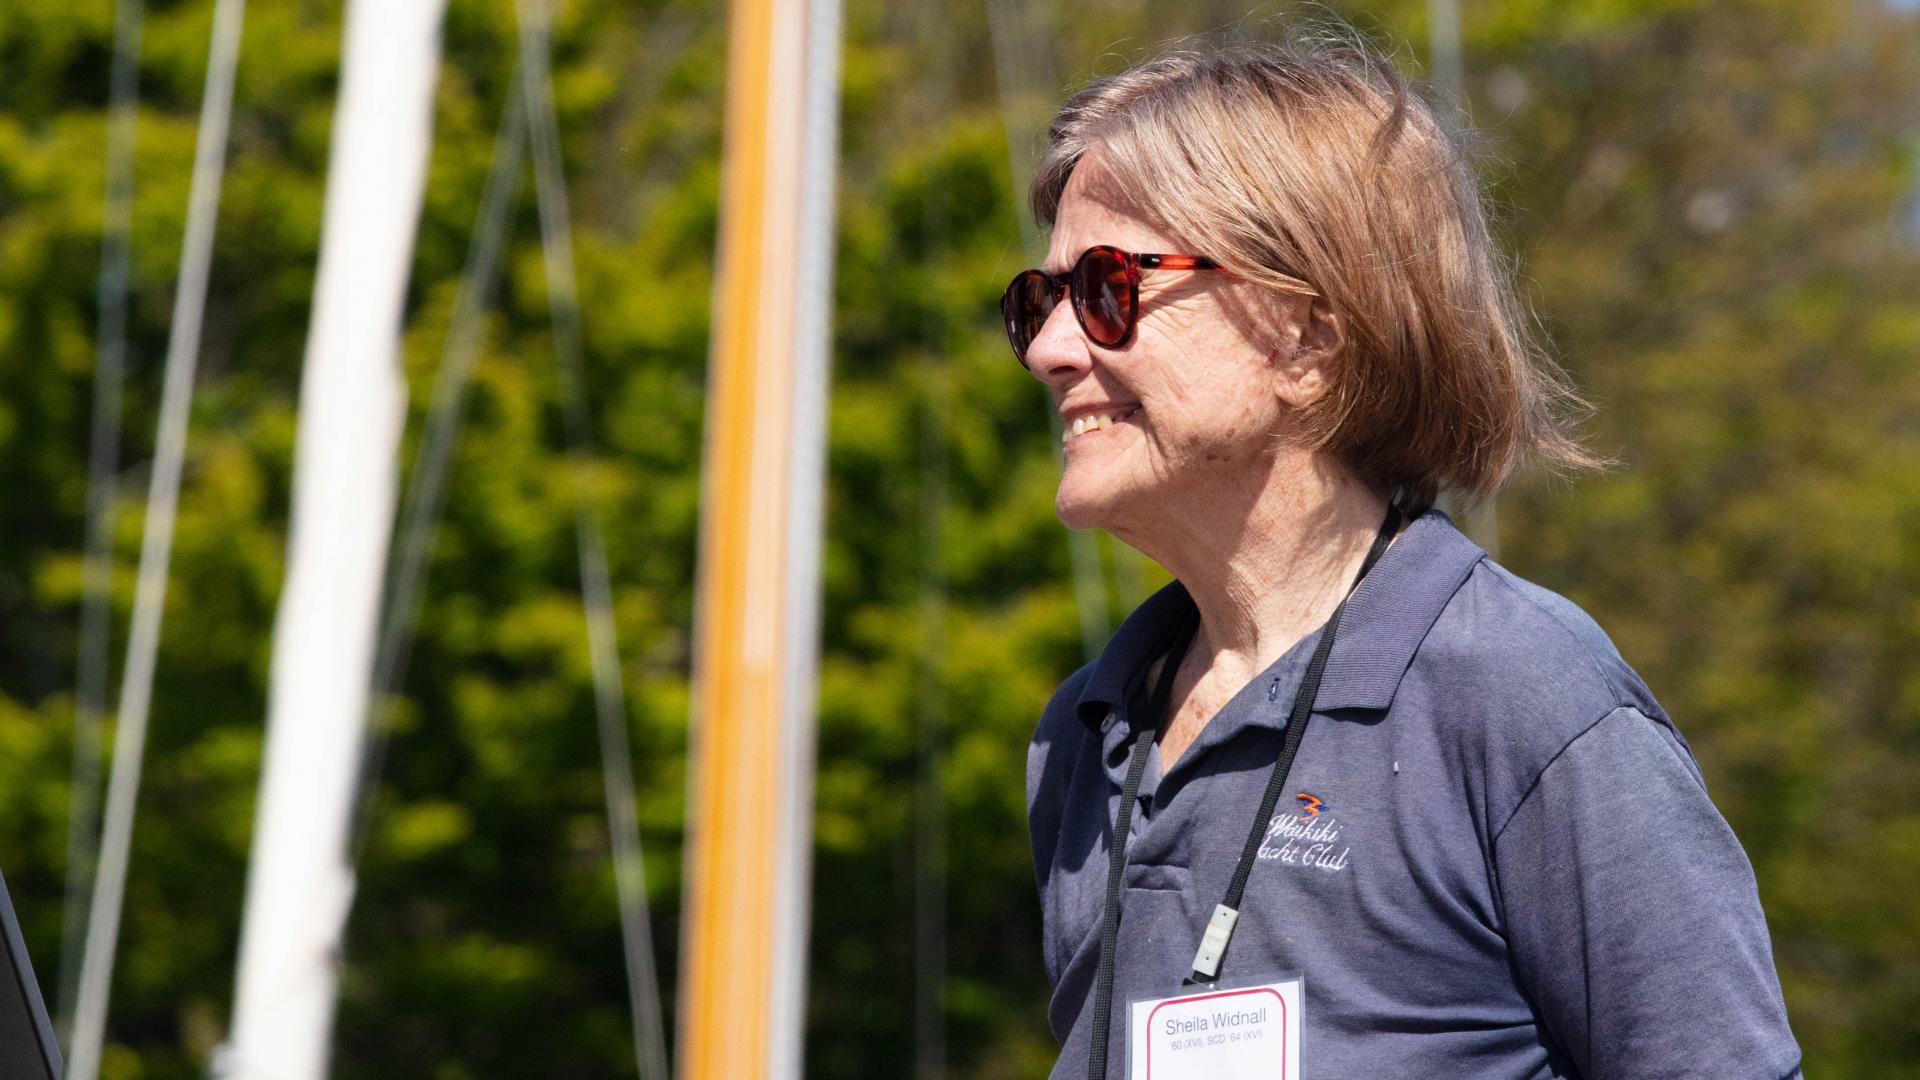 On May 11, a boat donated by MechE alumna and chair of the MIT Corporation Diane Greene SM ’78, was christened the “Chrys Chryssostomidis” in honor of Professor Chryssostomos Chryssostomidis. Greene and Chryssostomidis celebrated alongside members of the MIT community in a boat naming ceremony at the MIT Sailing Pavilion. 